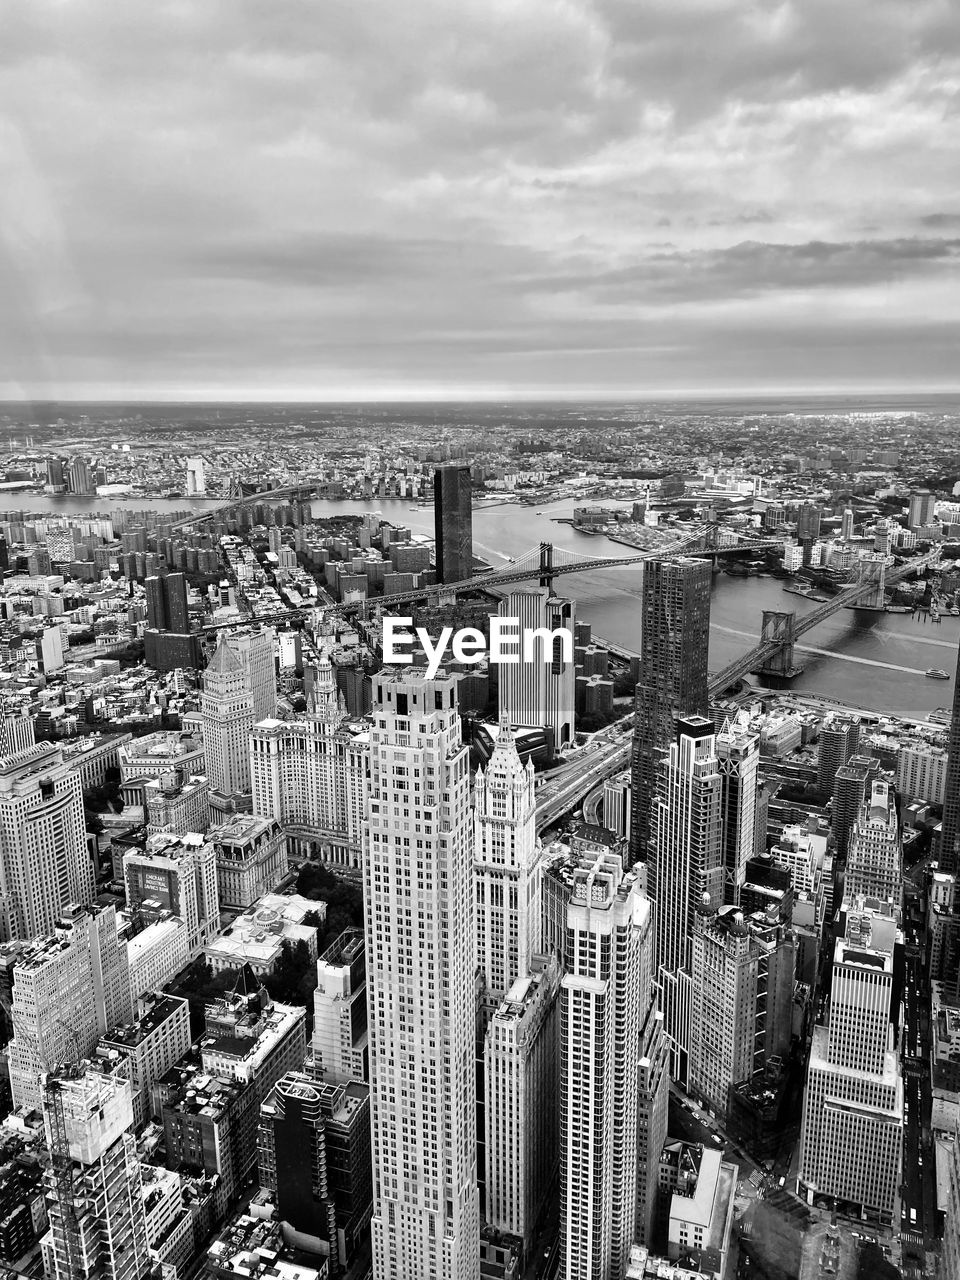 city, architecture, cityscape, building exterior, black and white, built structure, metropolis, sky, building, urban area, monochrome photography, metropolitan area, skyline, landscape, monochrome, urban skyline, office building exterior, skyscraper, high angle view, travel destinations, cloud, nature, aerial photography, crowd, residential district, tower block, aerial view, crowded, horizon, travel, residential area, downtown, city life, tower, outdoors, water, day, tourism, sea, downtown district, neighbourhood, office